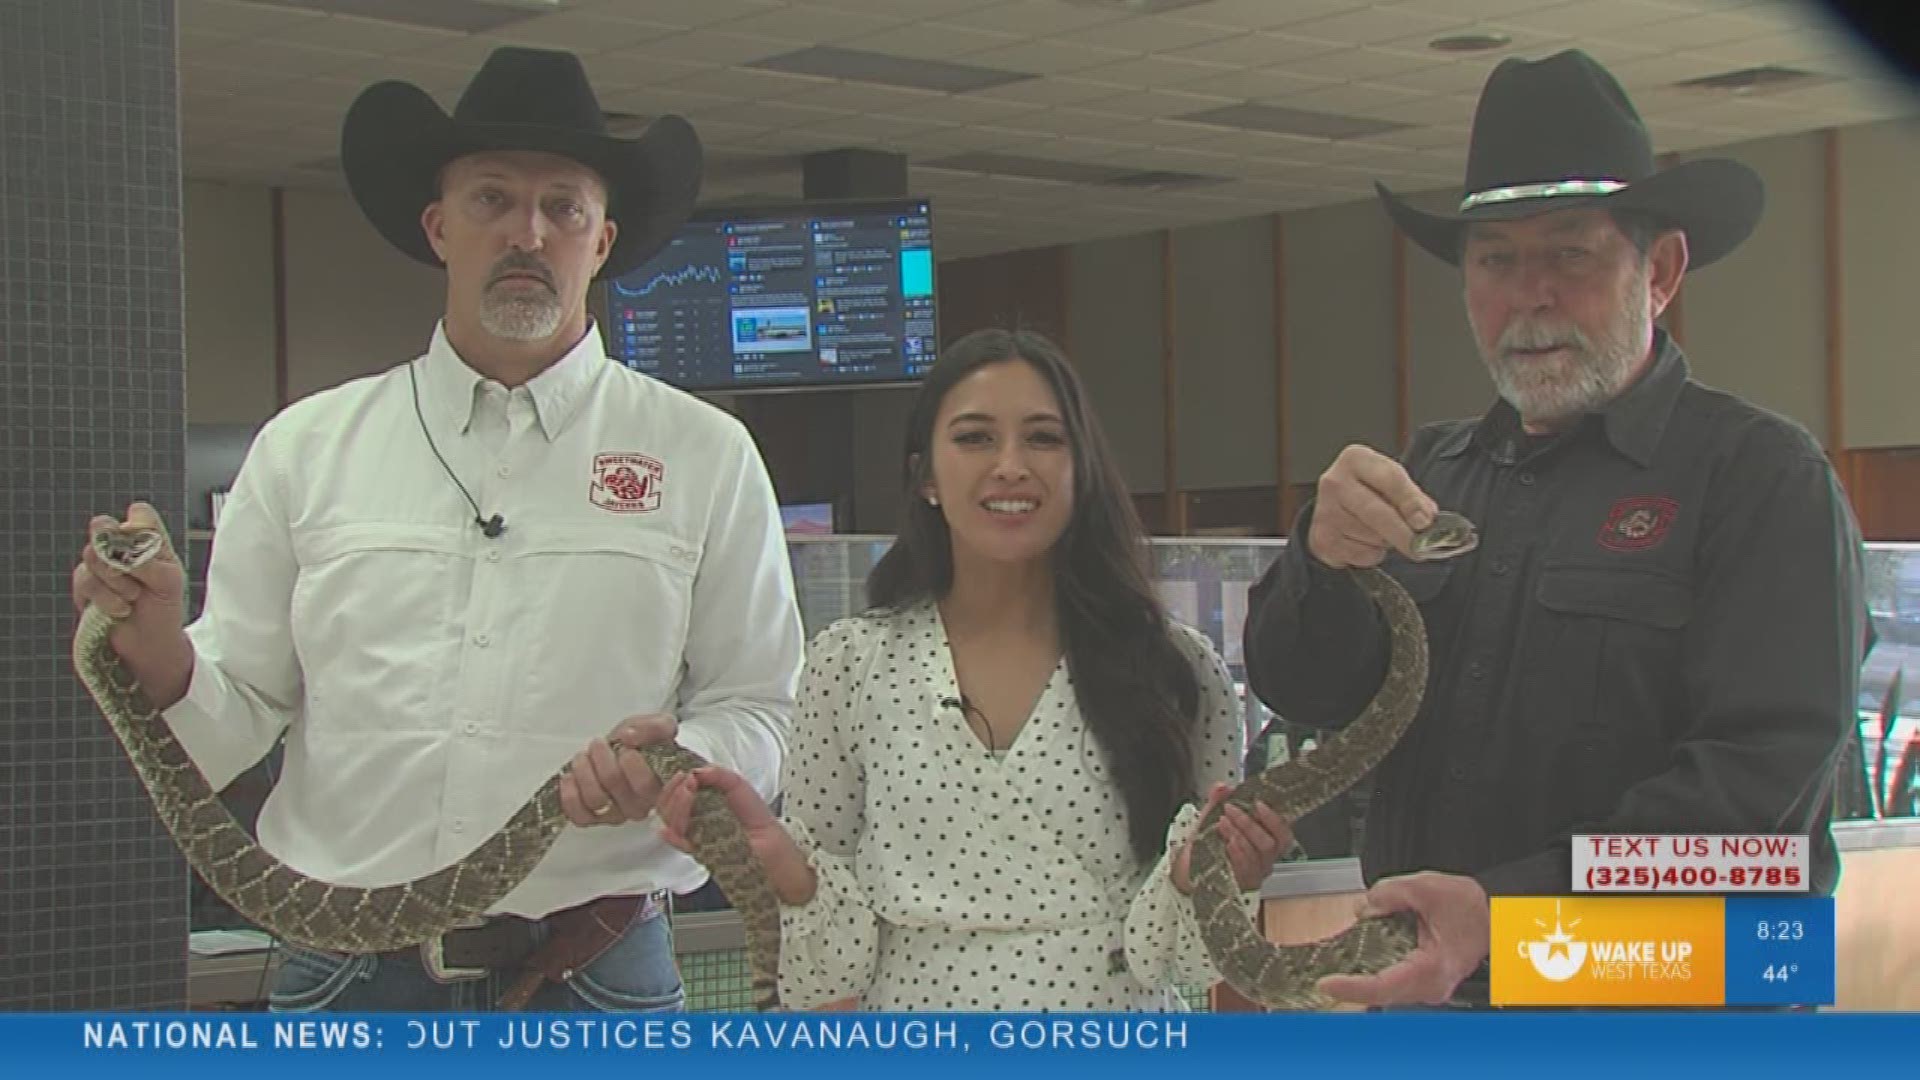 World's Largest Rattlesnake Roundup scales back population with animal management and fun.